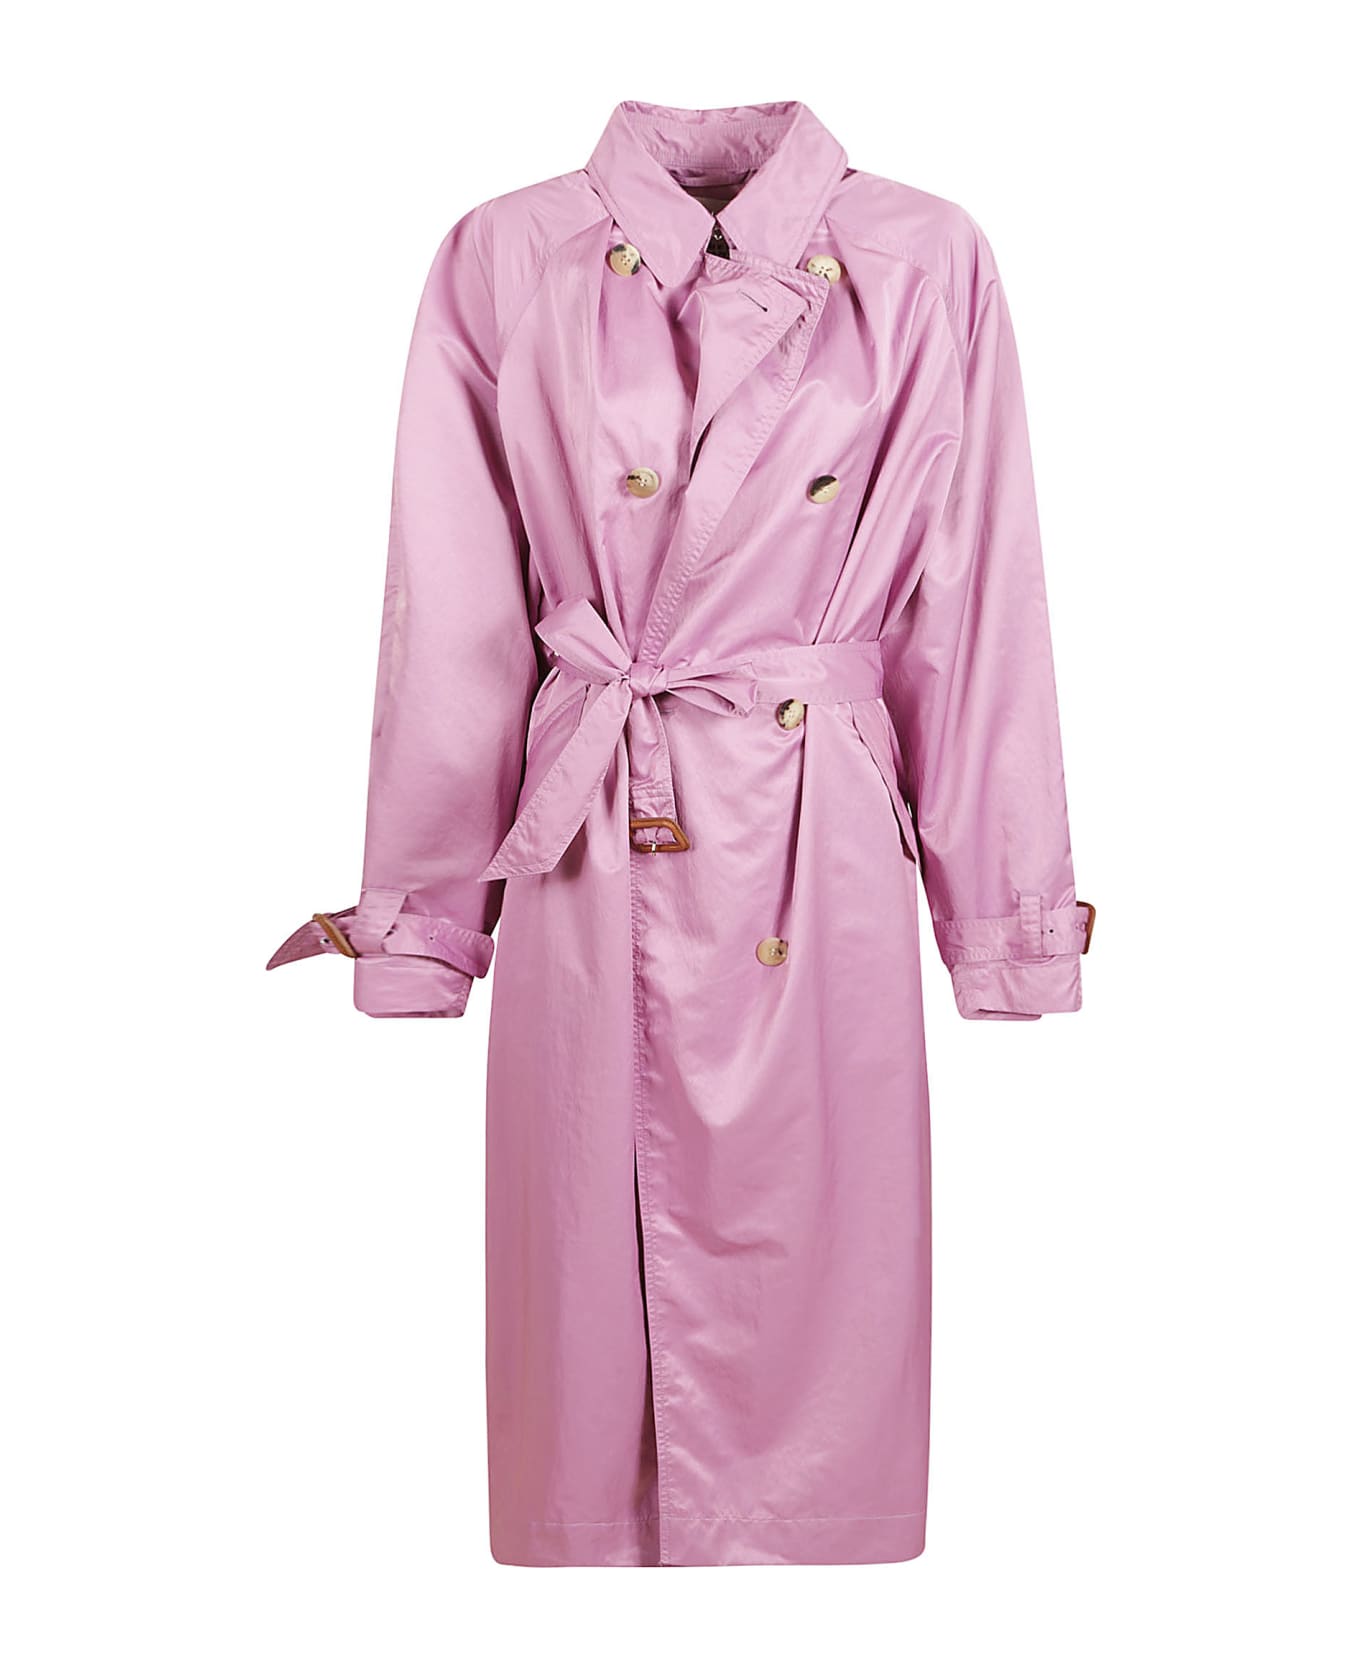 Isabel Marant Lilac Polyester Blend Oversize Edenna Trench Coat - Lilac